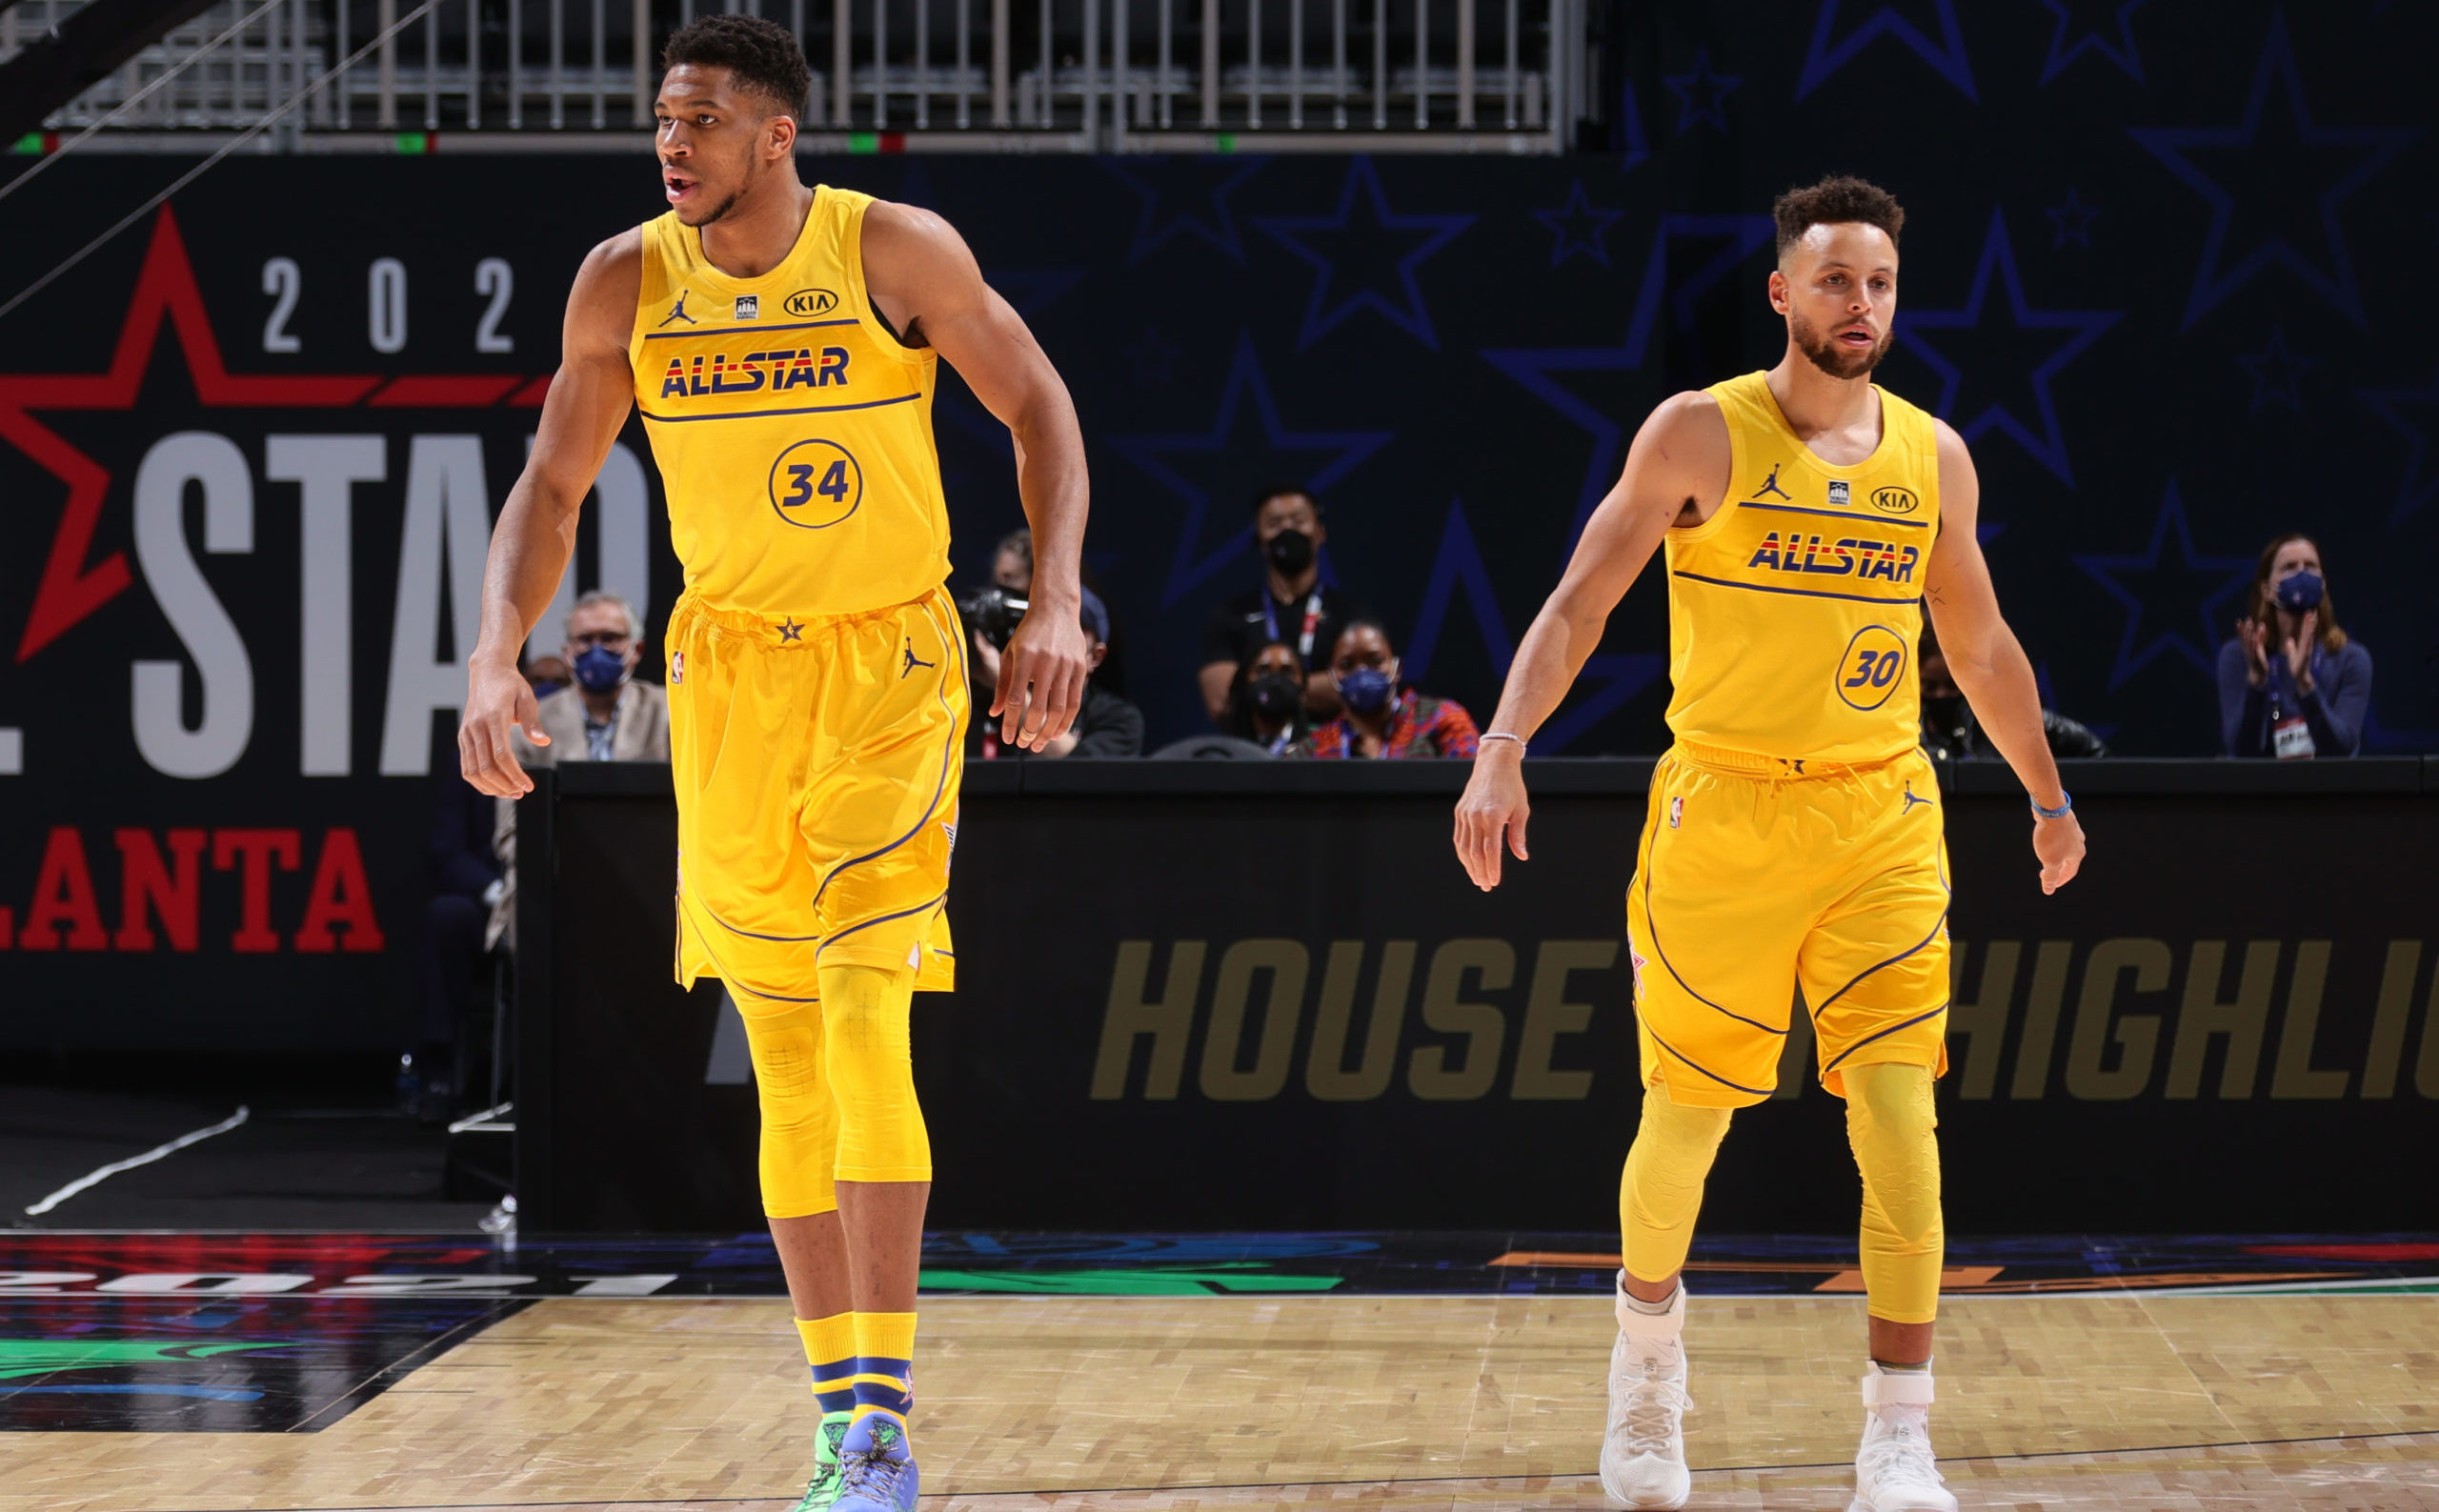 From Voting to Tip-off, Here’s Everything You Need to Know About the 2022 NBA All Star Game